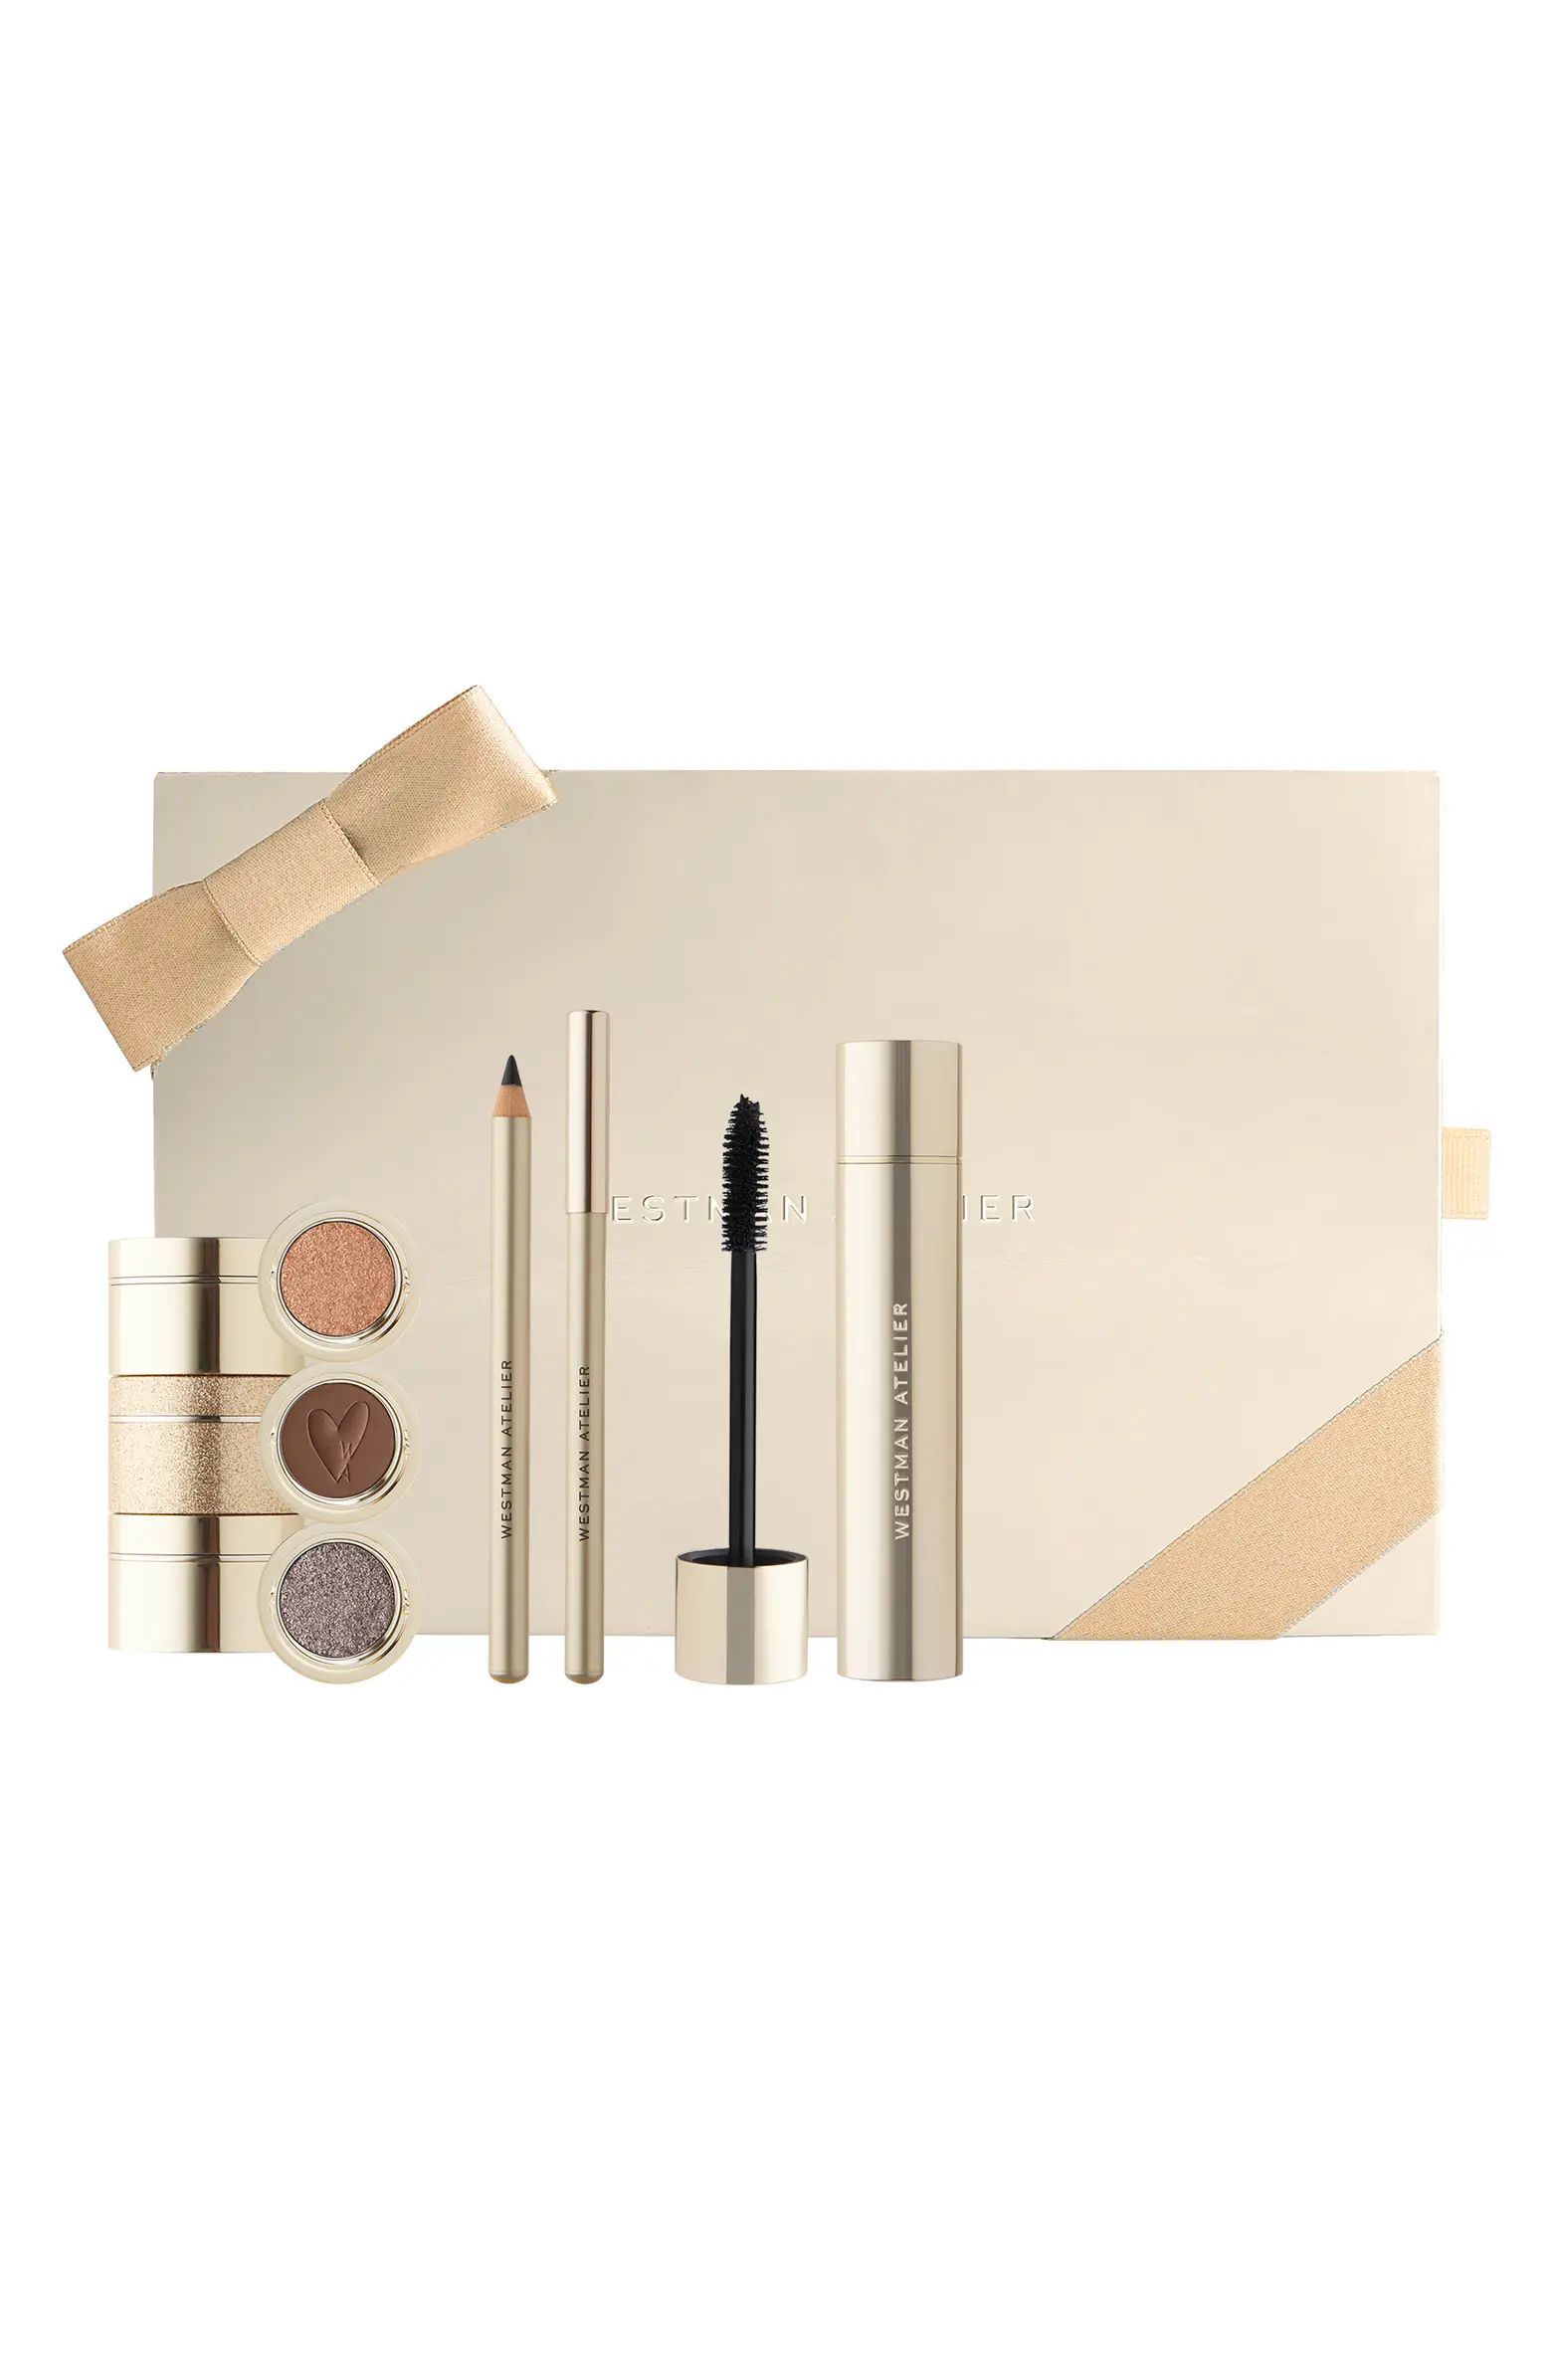 The Eye Love You Makeup Edition Set | Nordstrom